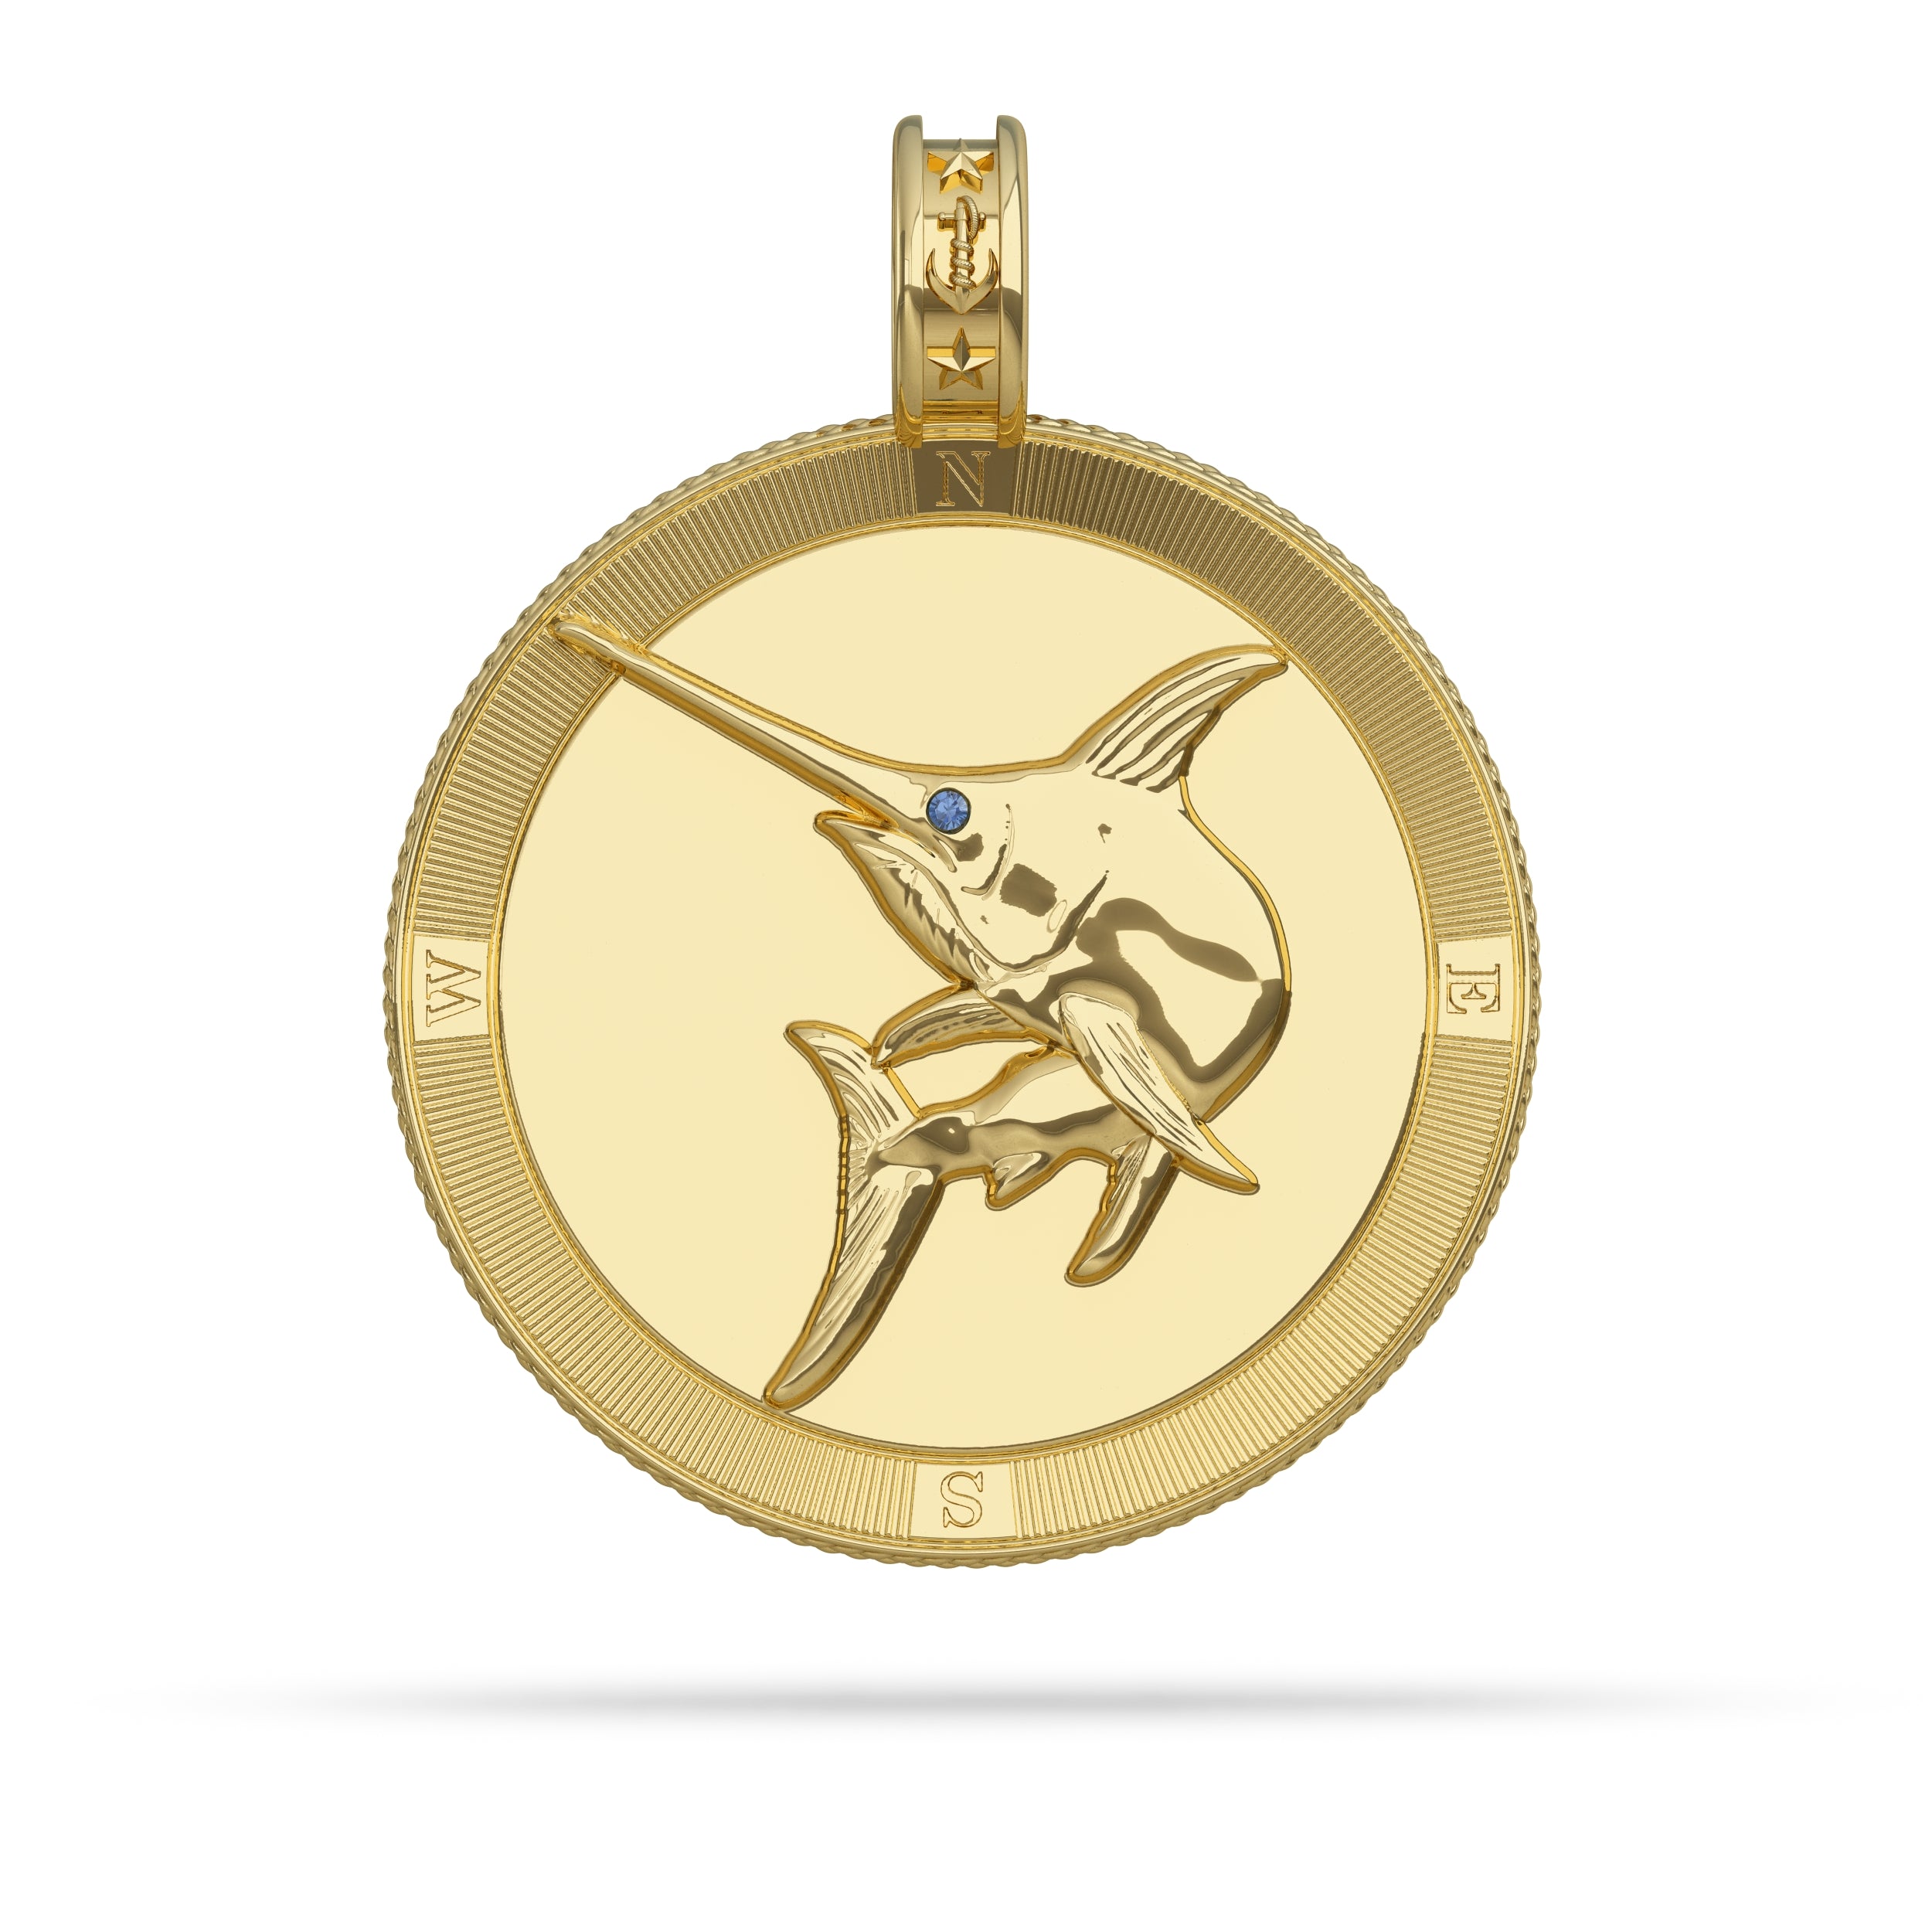  Swordfish Compass Medallion Pendant Large in Gold by Nautical Treasure